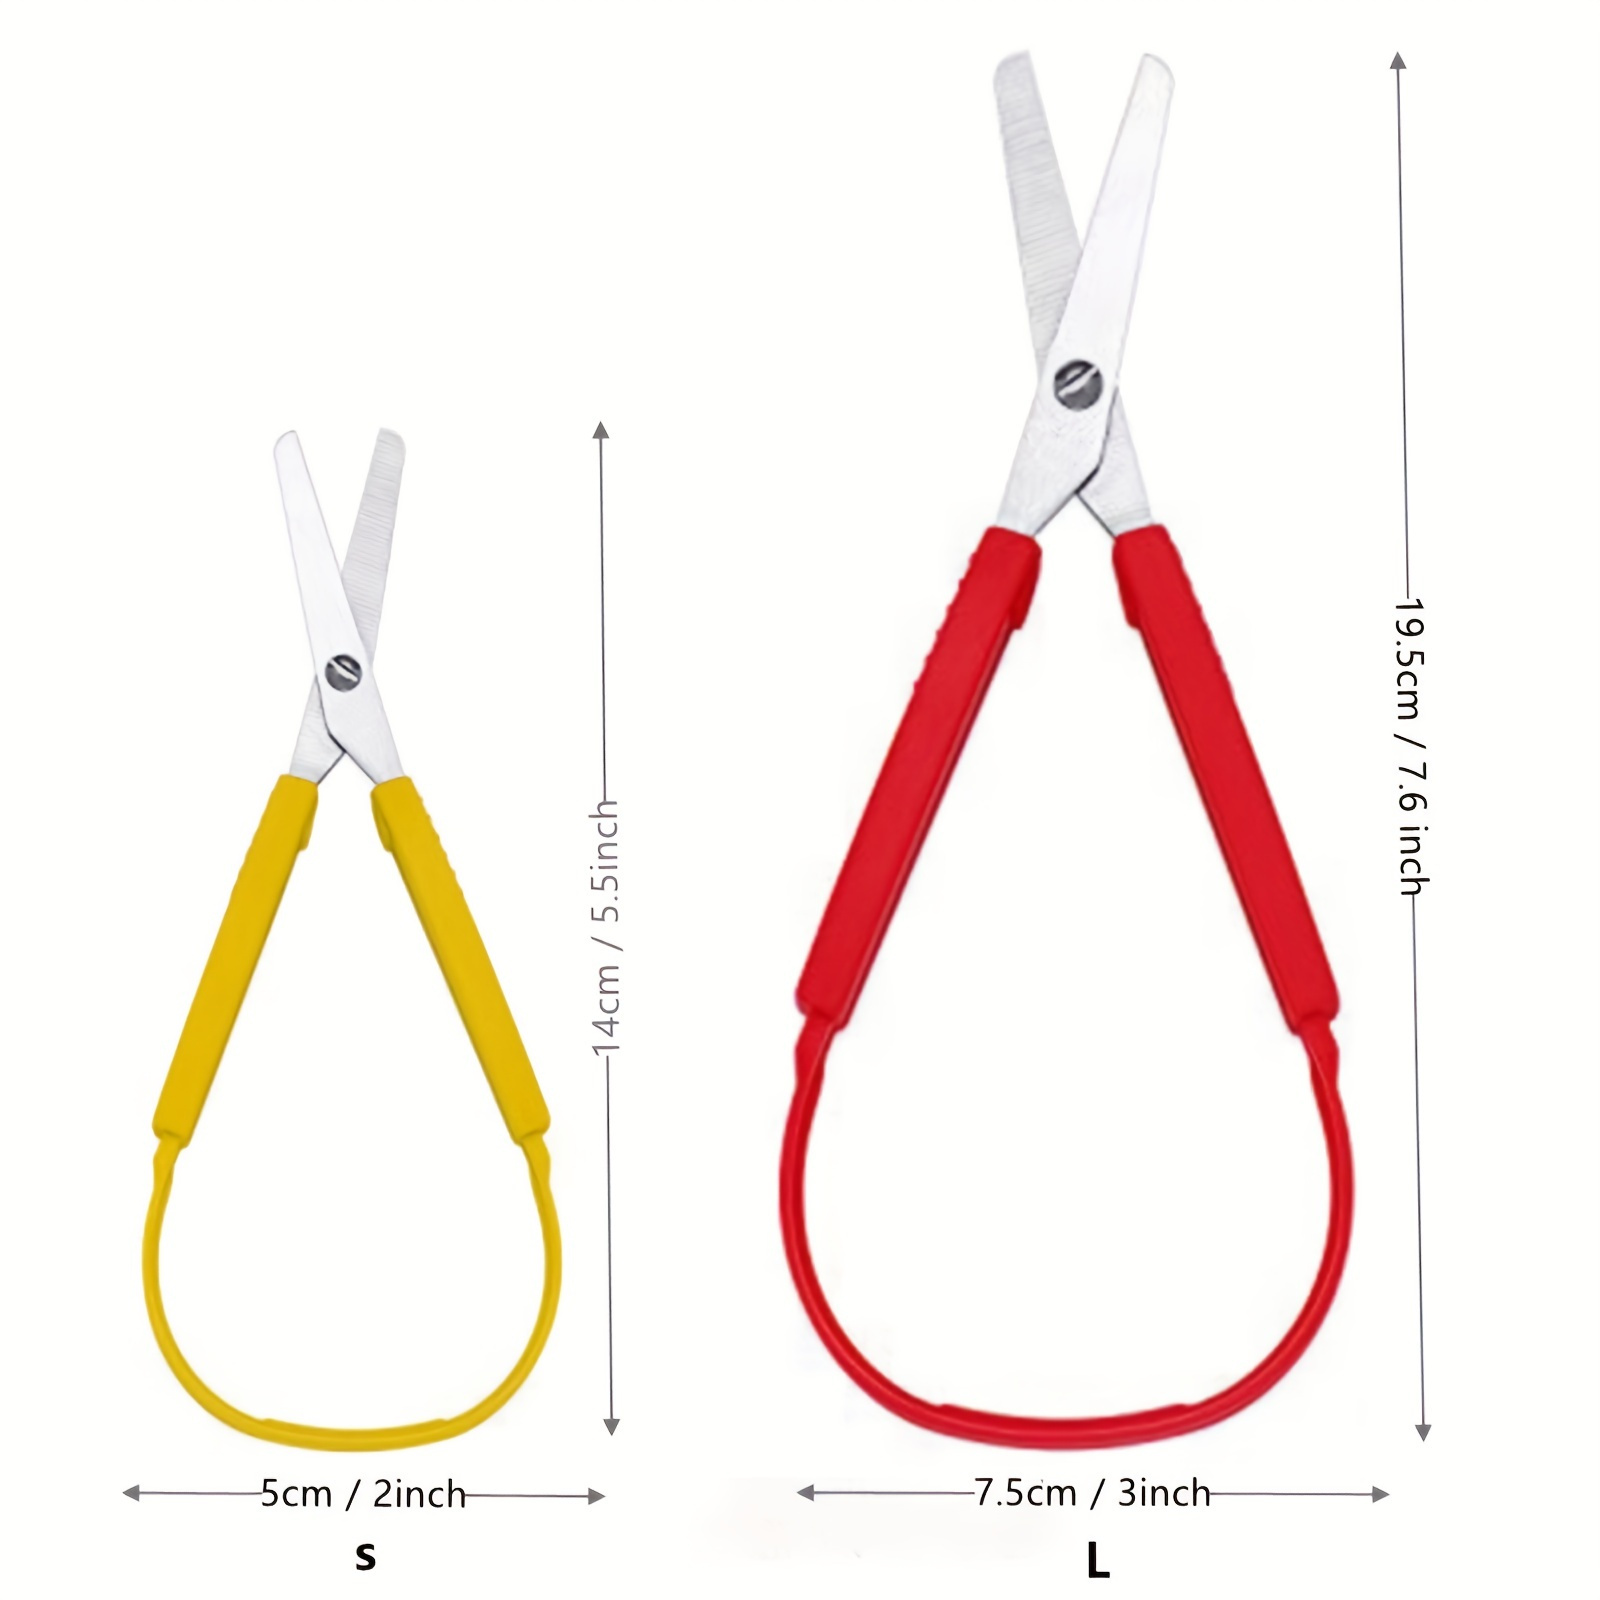 Special Supplies Mini Loop Scissors for Children and Teens and 5.5 Inches (6-pack) Colorful Looped, Adaptive Design, Right and Lefty Support, Small